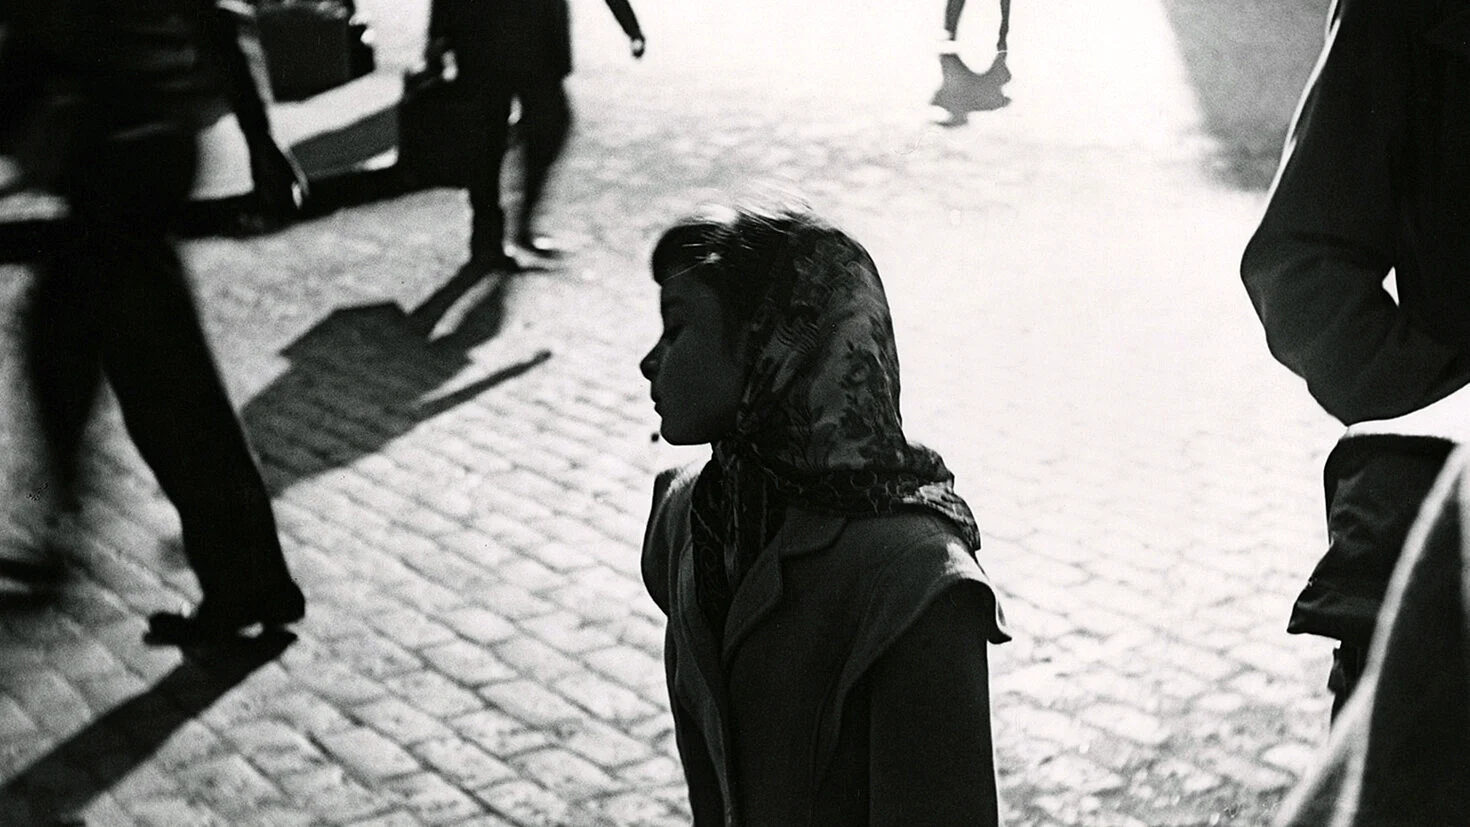 Saul Leiter - Early Black And White Wallpaper